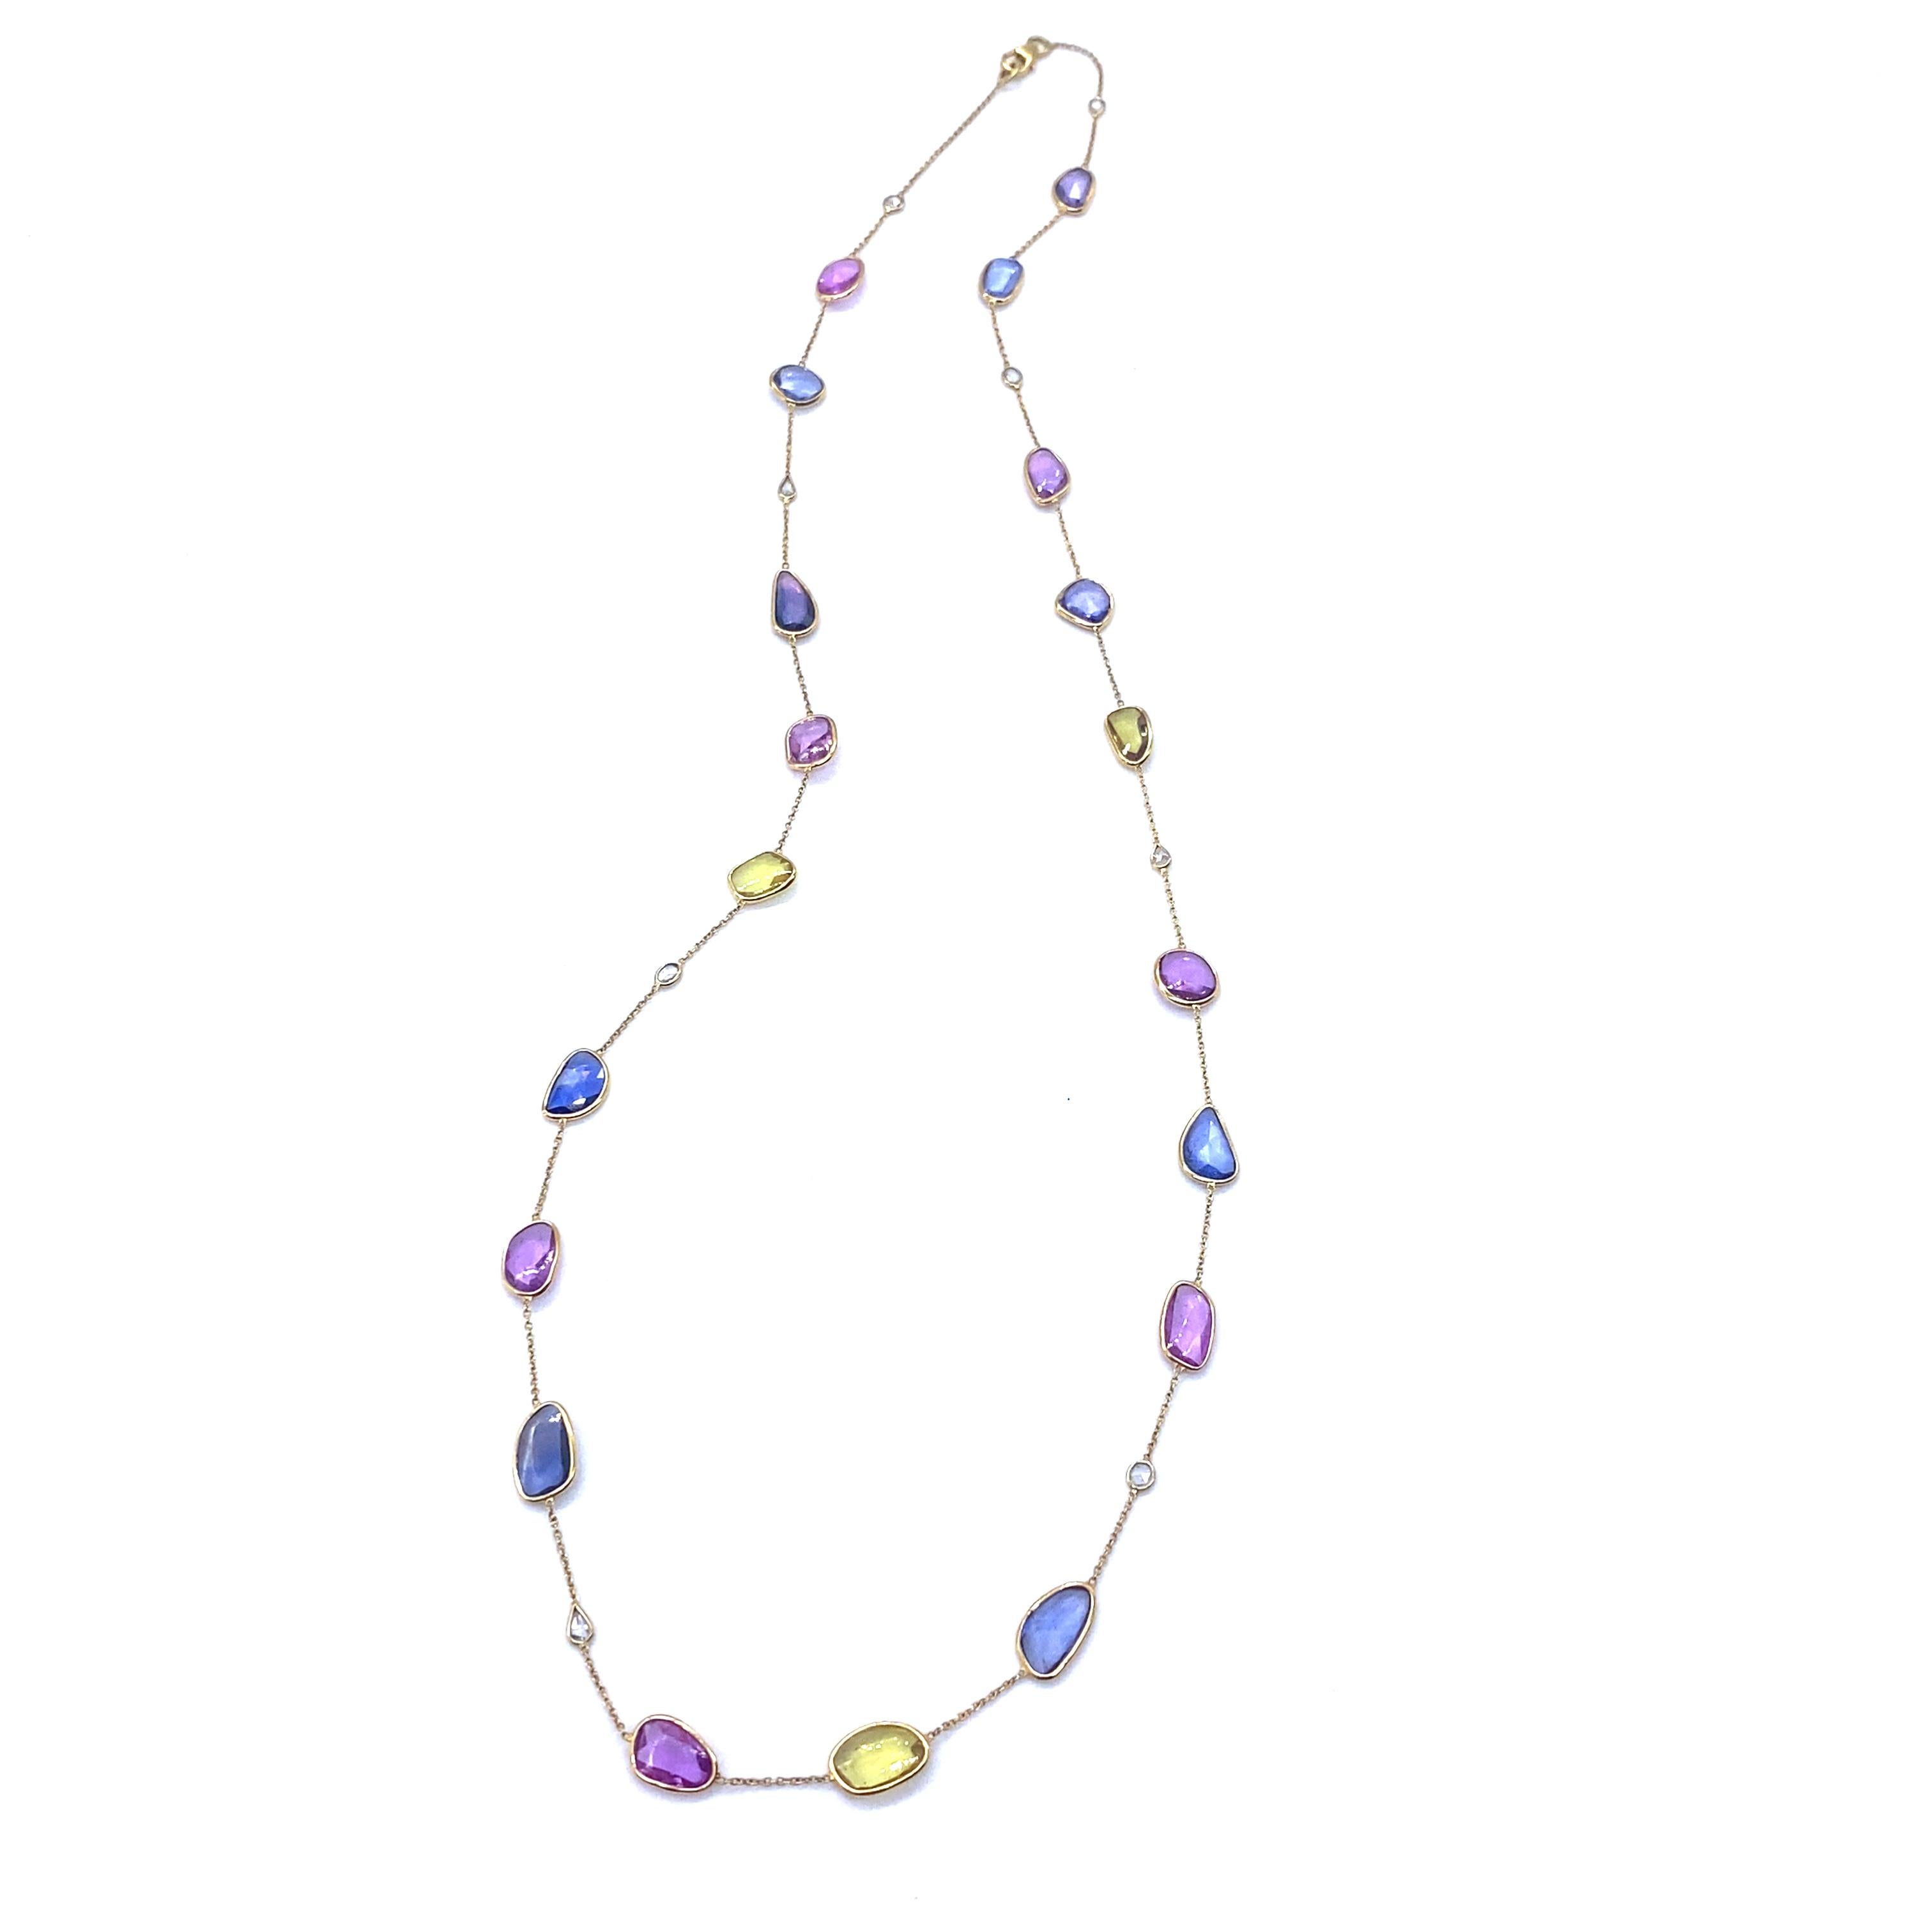 Trinity Necklace Set in 18 Karat White Gold with 28.45 Carat Rose-Cut Sapphire and 0.50 Carat Rose-Cut Diamonds. The Sapphires Exhibit A Vibrant Array of Hues, From Brilliant Yellow and Vivid Violet to Bold Blue and Pale Pink.